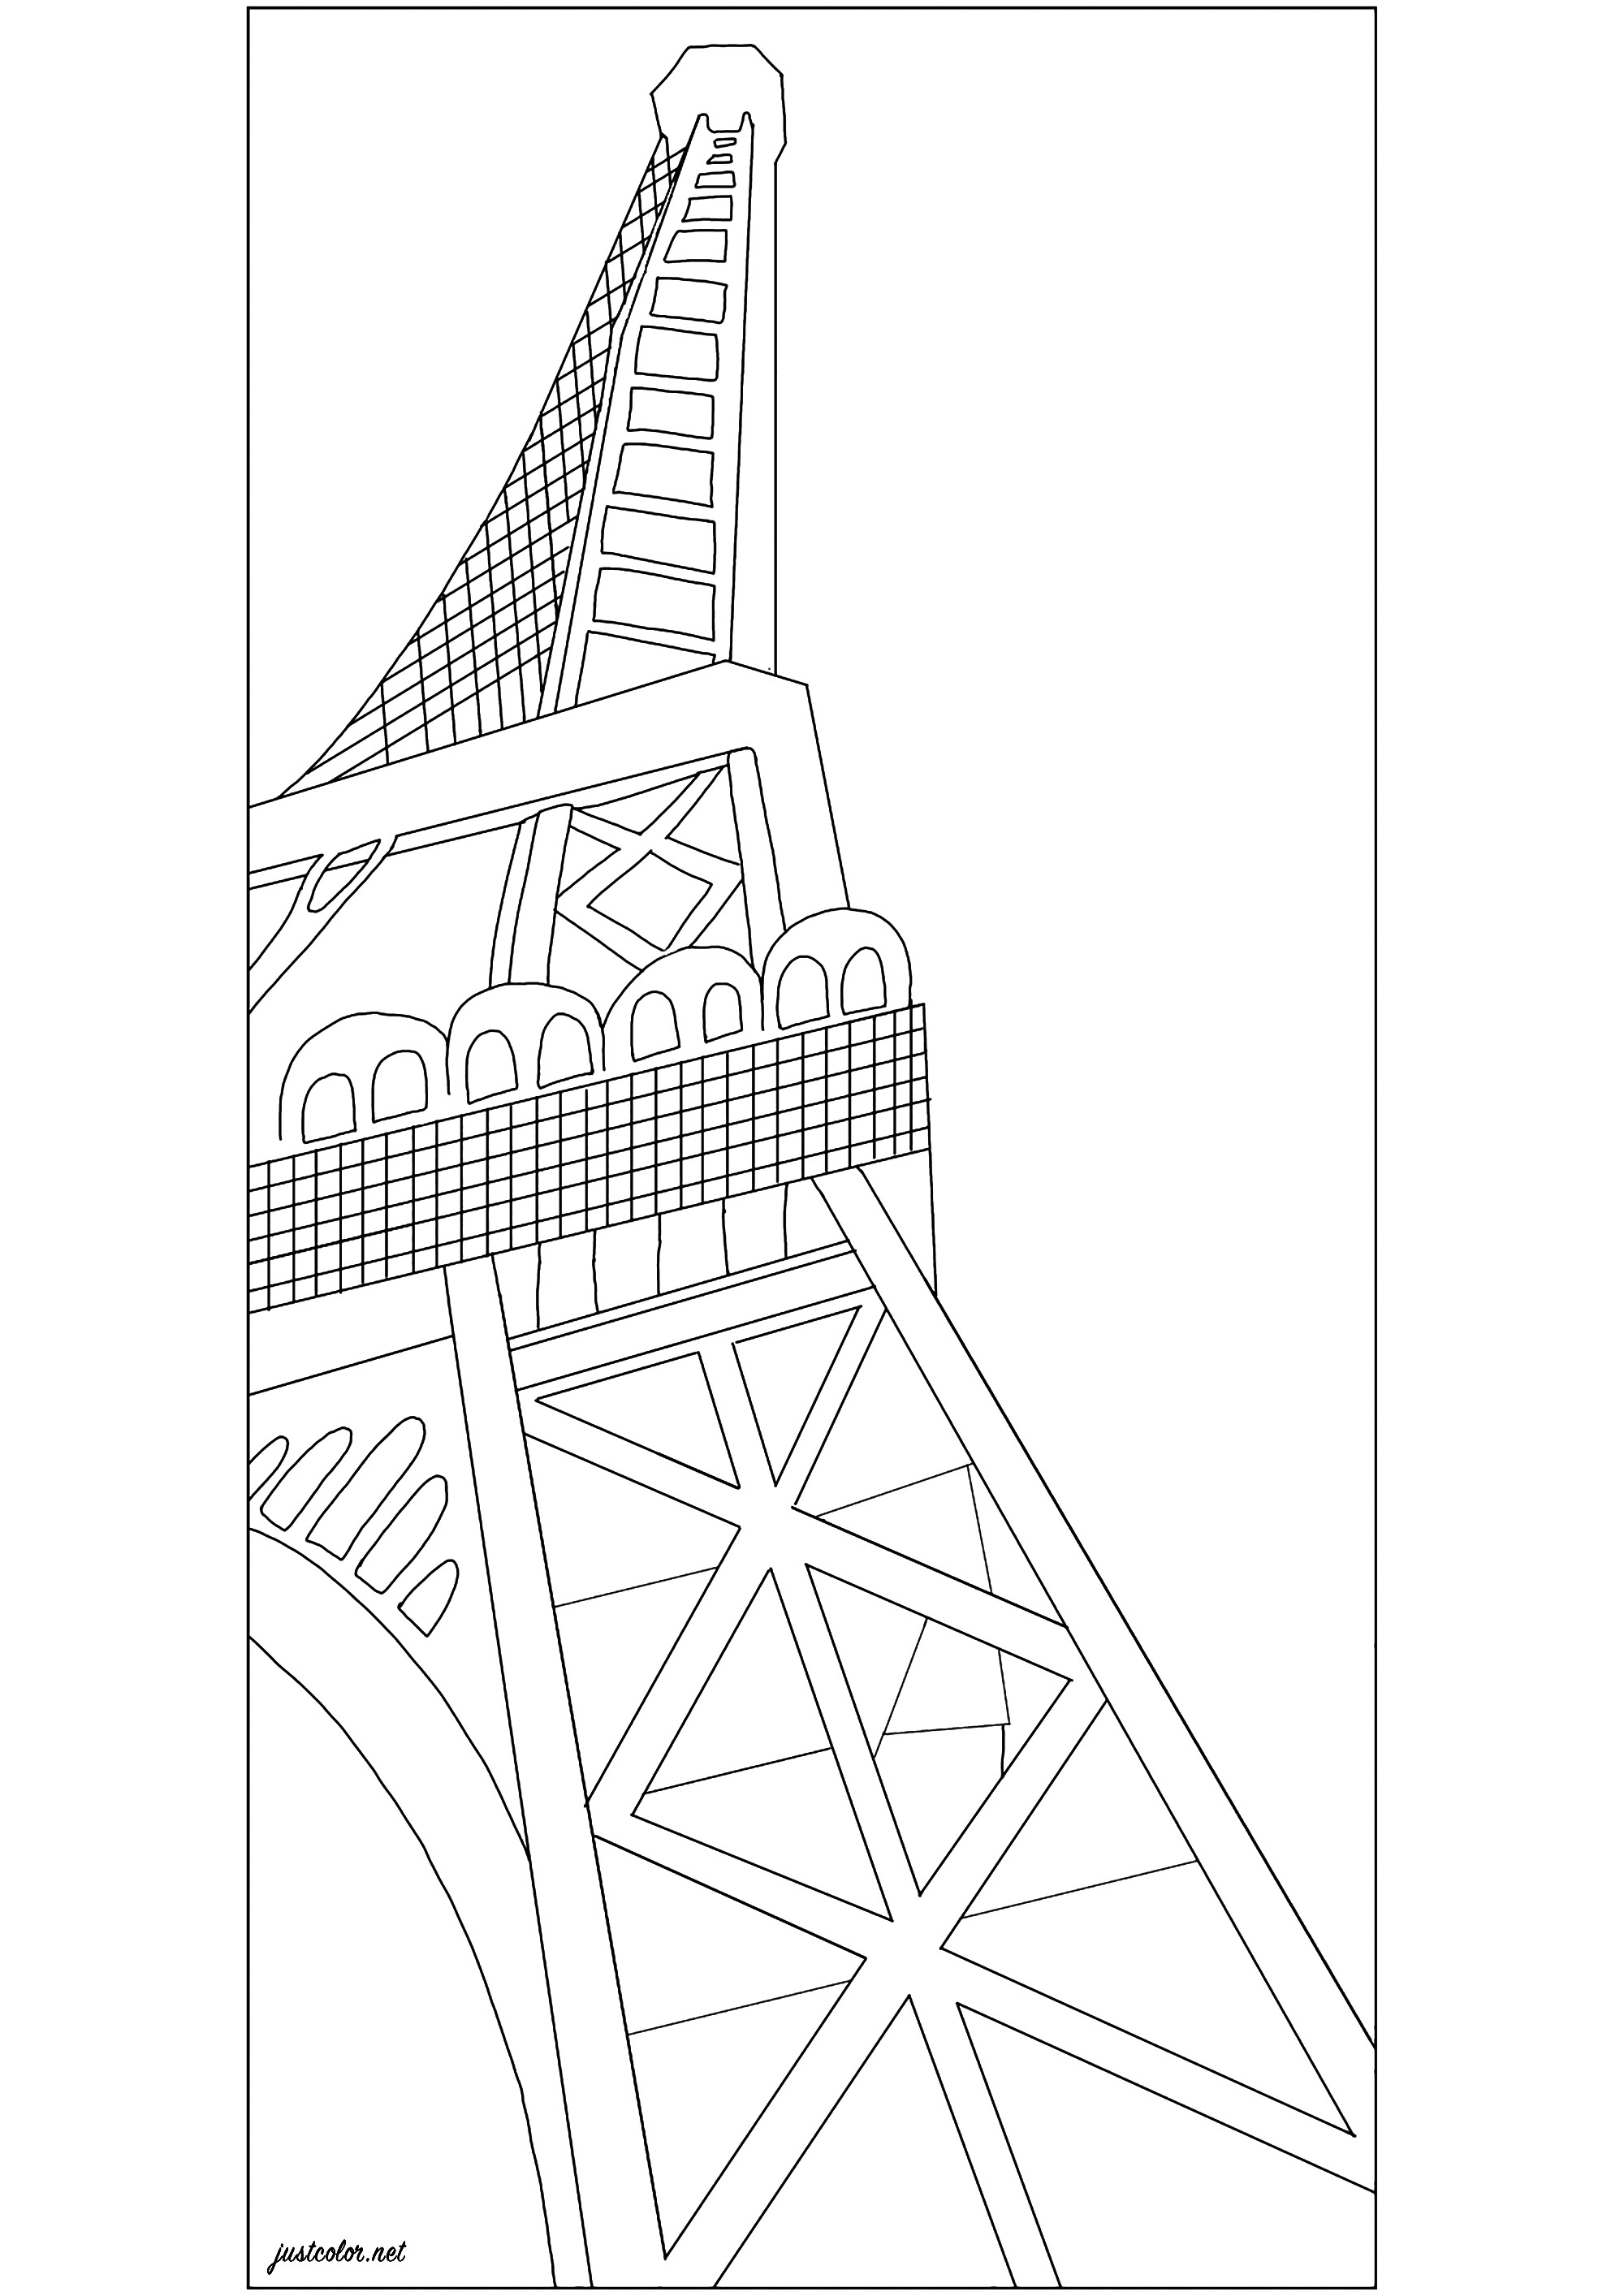 Coloring based on 'The Eiffel Tower' (1926) by Robert Delaunay. The Eiffel Tower, built by Gustave Eiffel in 1889, became a symbol of modernity that fascinated painter Robert Delaunay. After breaking it down in a major Cubist series in the early 1910s, the artist glorified it using flamboyant colors and a powerful view-from-below effect, often adopted by photographers of the period, Artist : Jade F